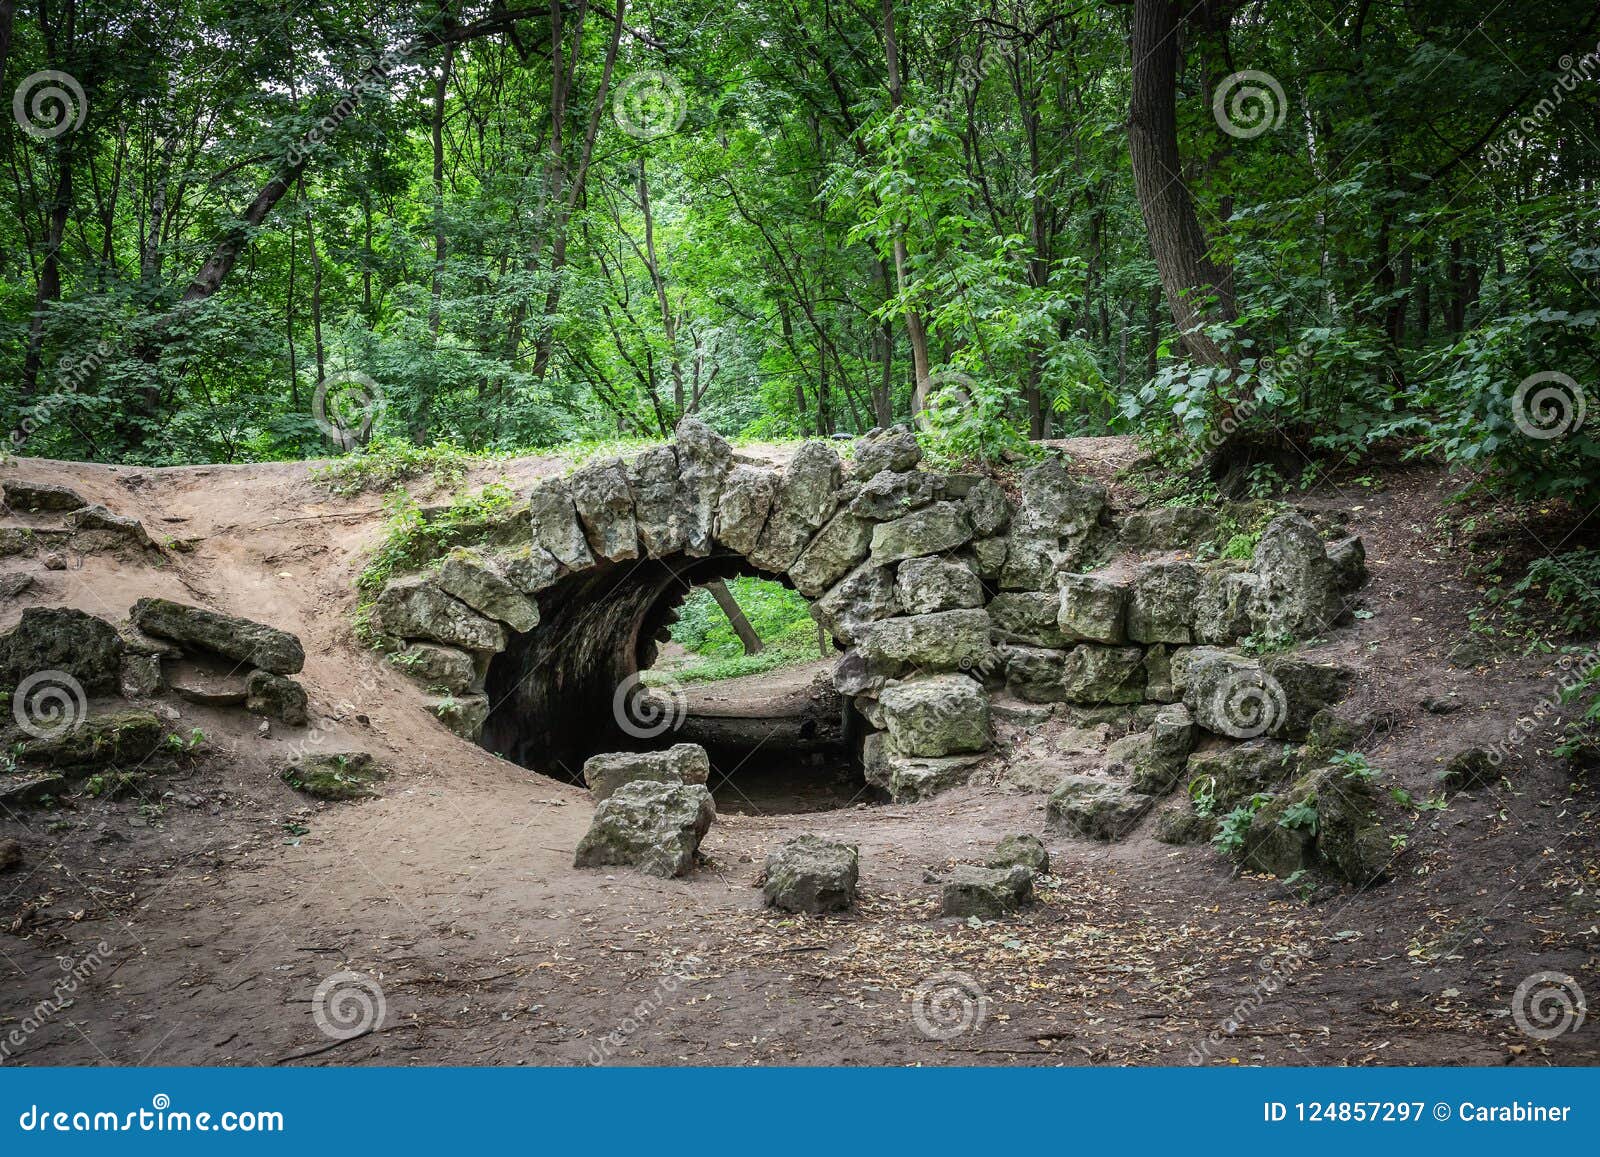 Old Stone Bridge In The Forest Stock Image Image Of Outdoor Leaf